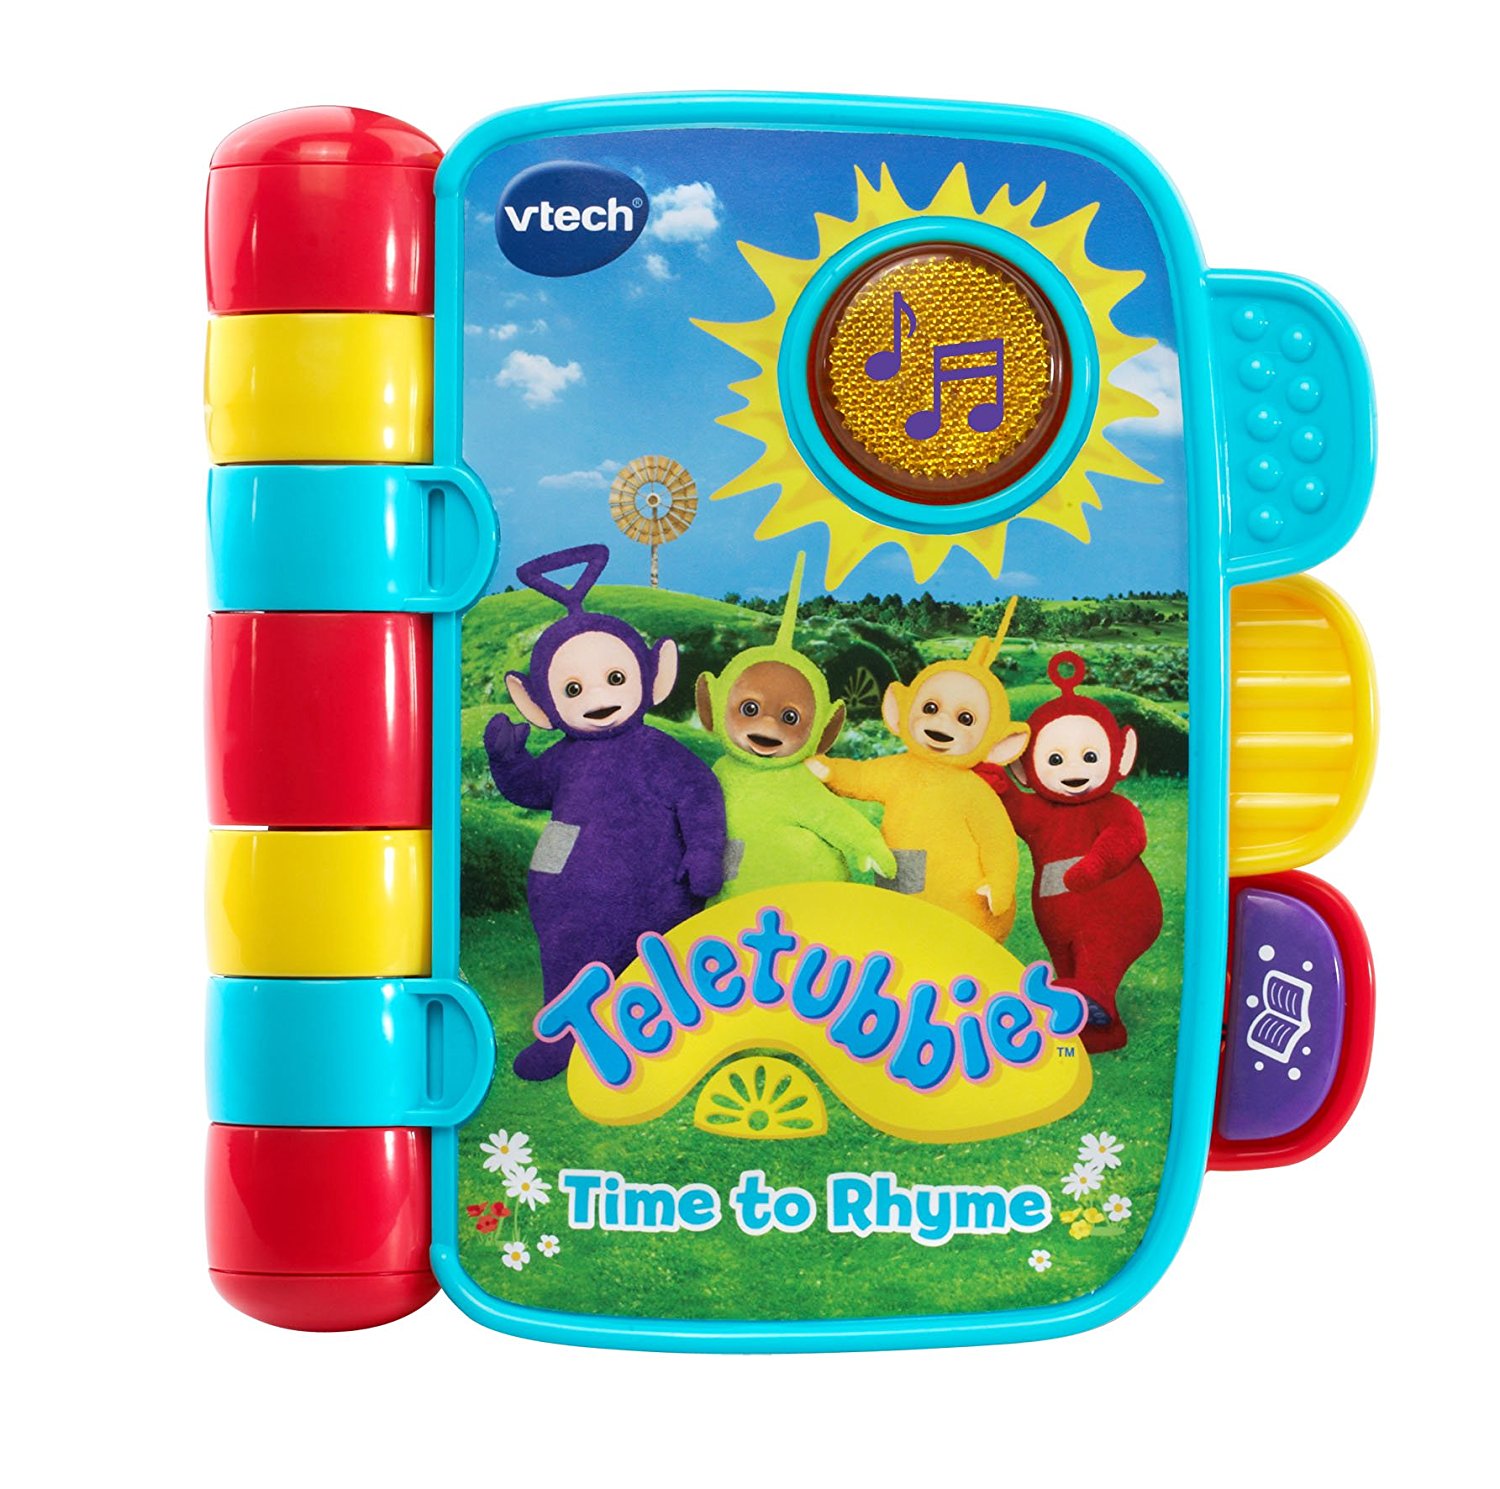 vtech teletubbies time to rhyme